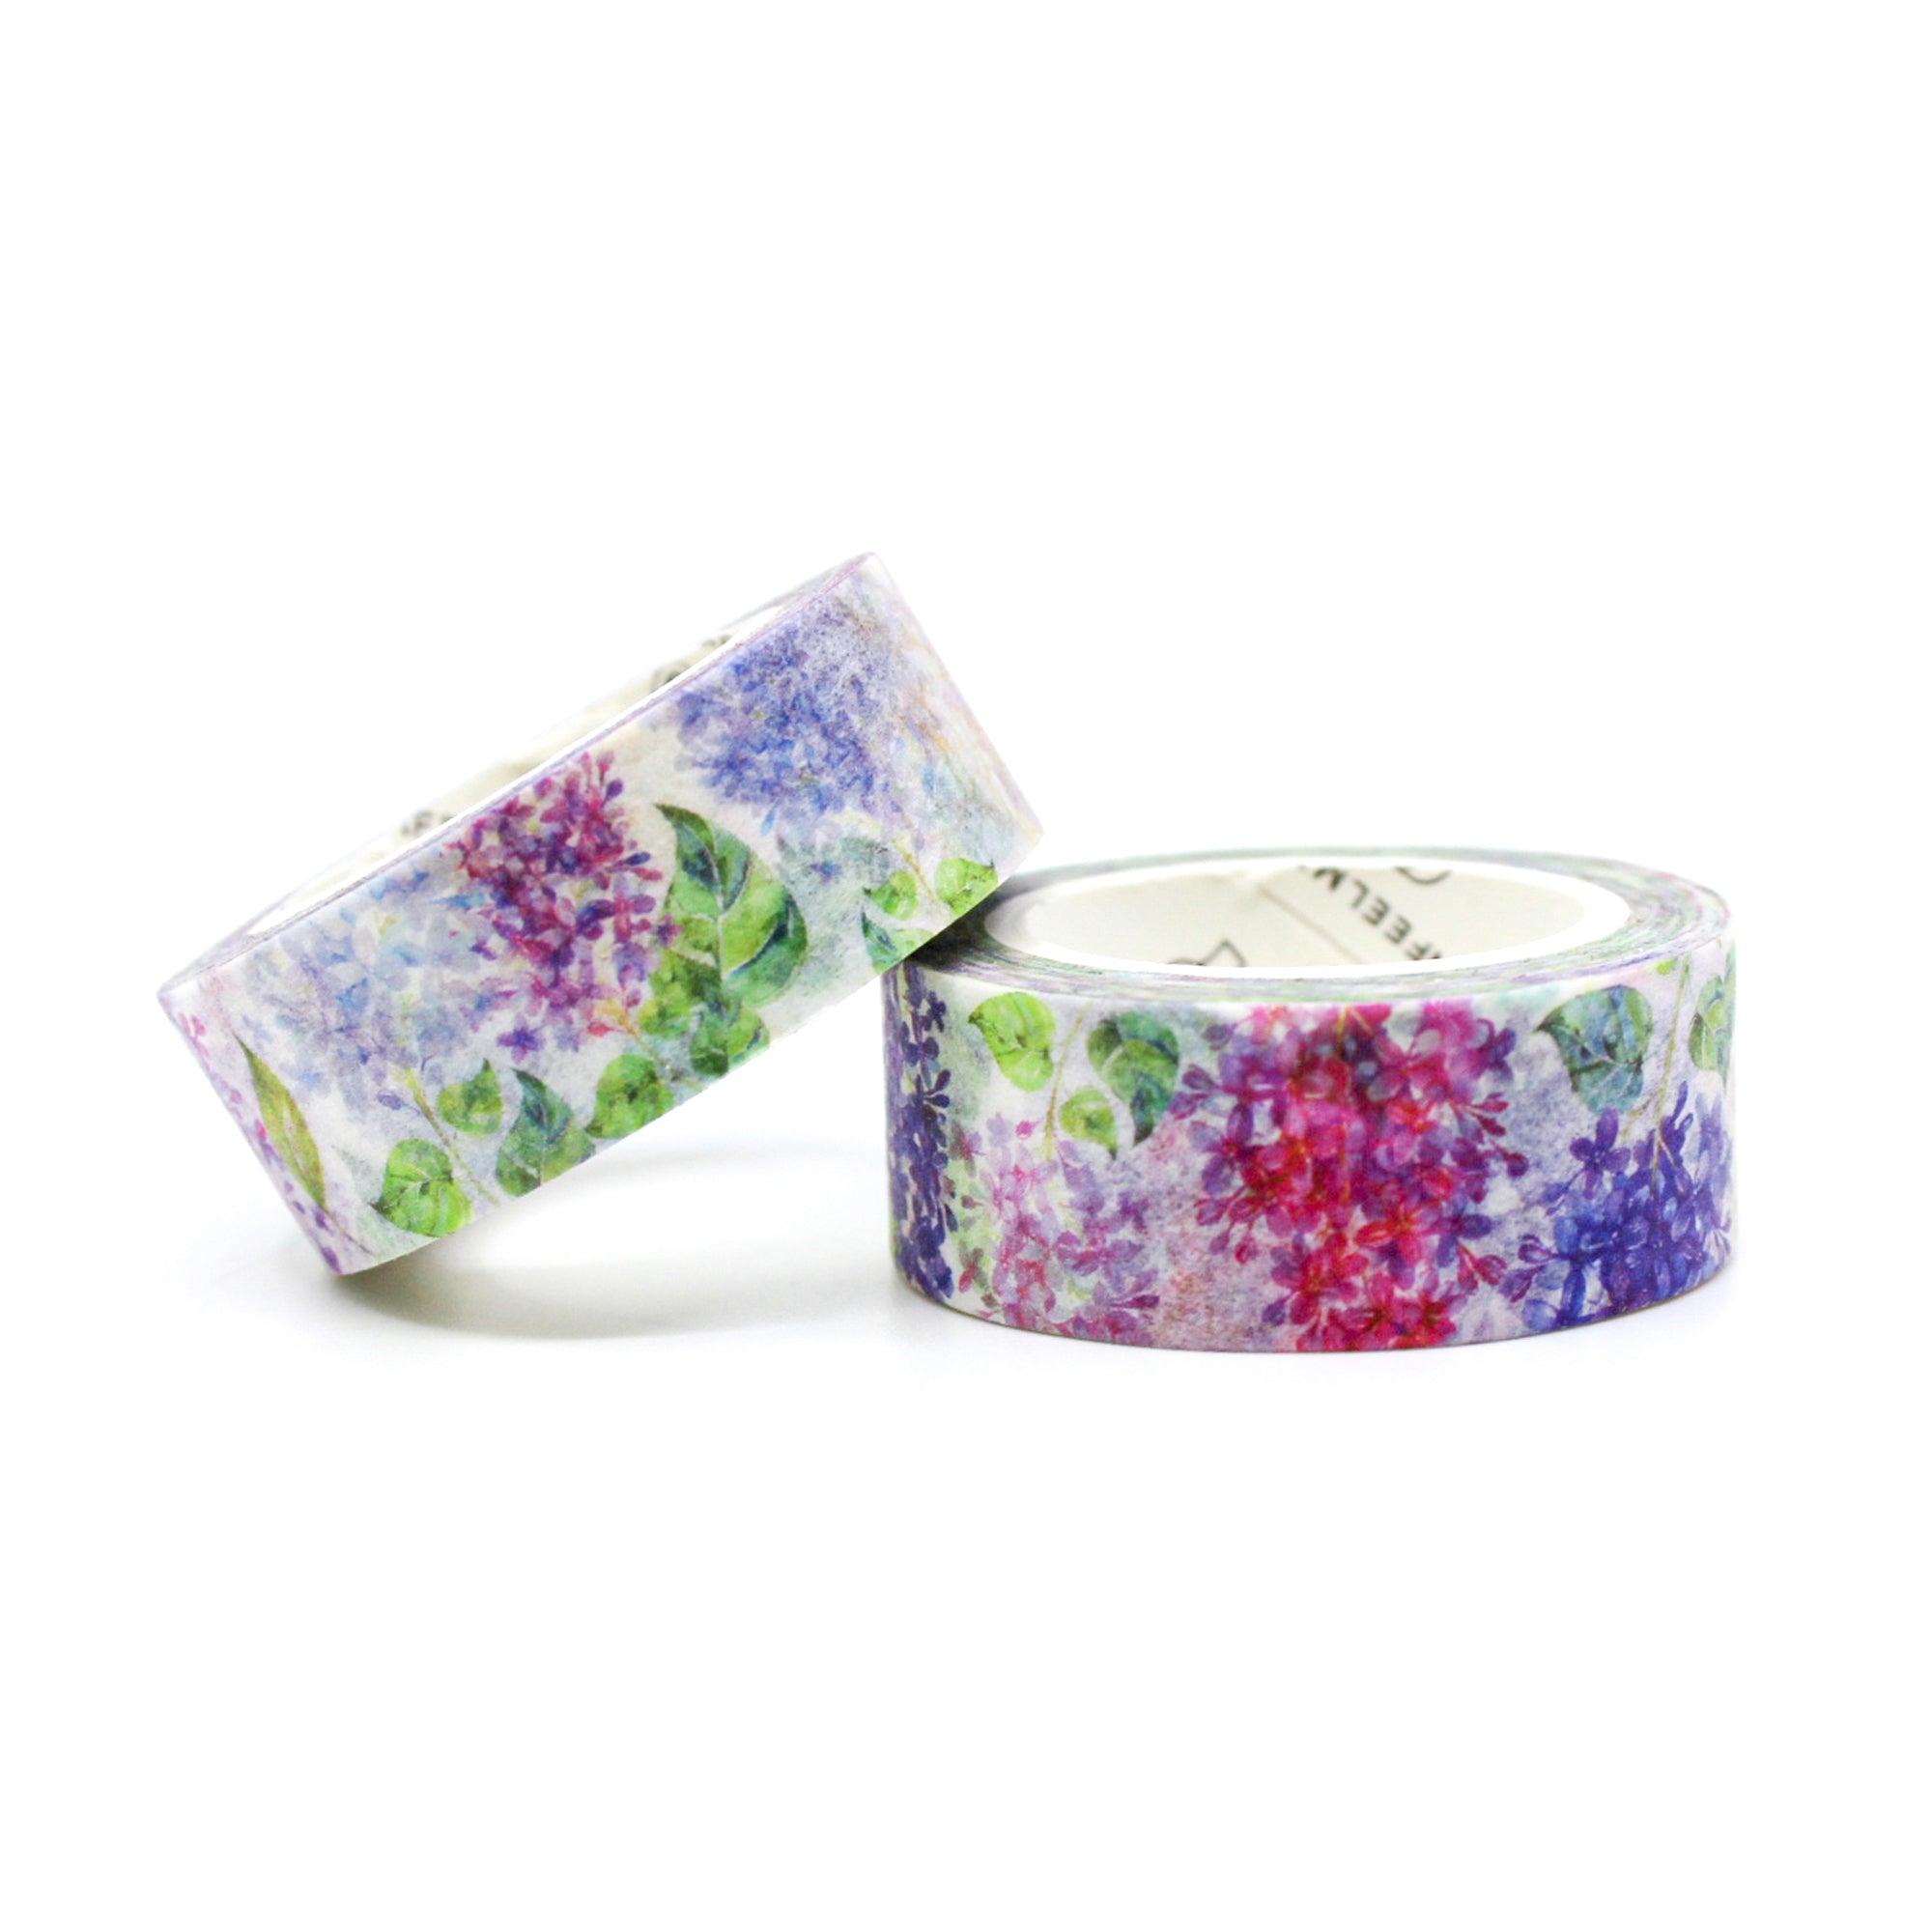 This pretty purple hydrangea flower tape is a vibrant floral pattern that is perfect for your BUJO and craft projects. Spring is in the air with this gorgeous tape from BBB Supplies Craft Shop.